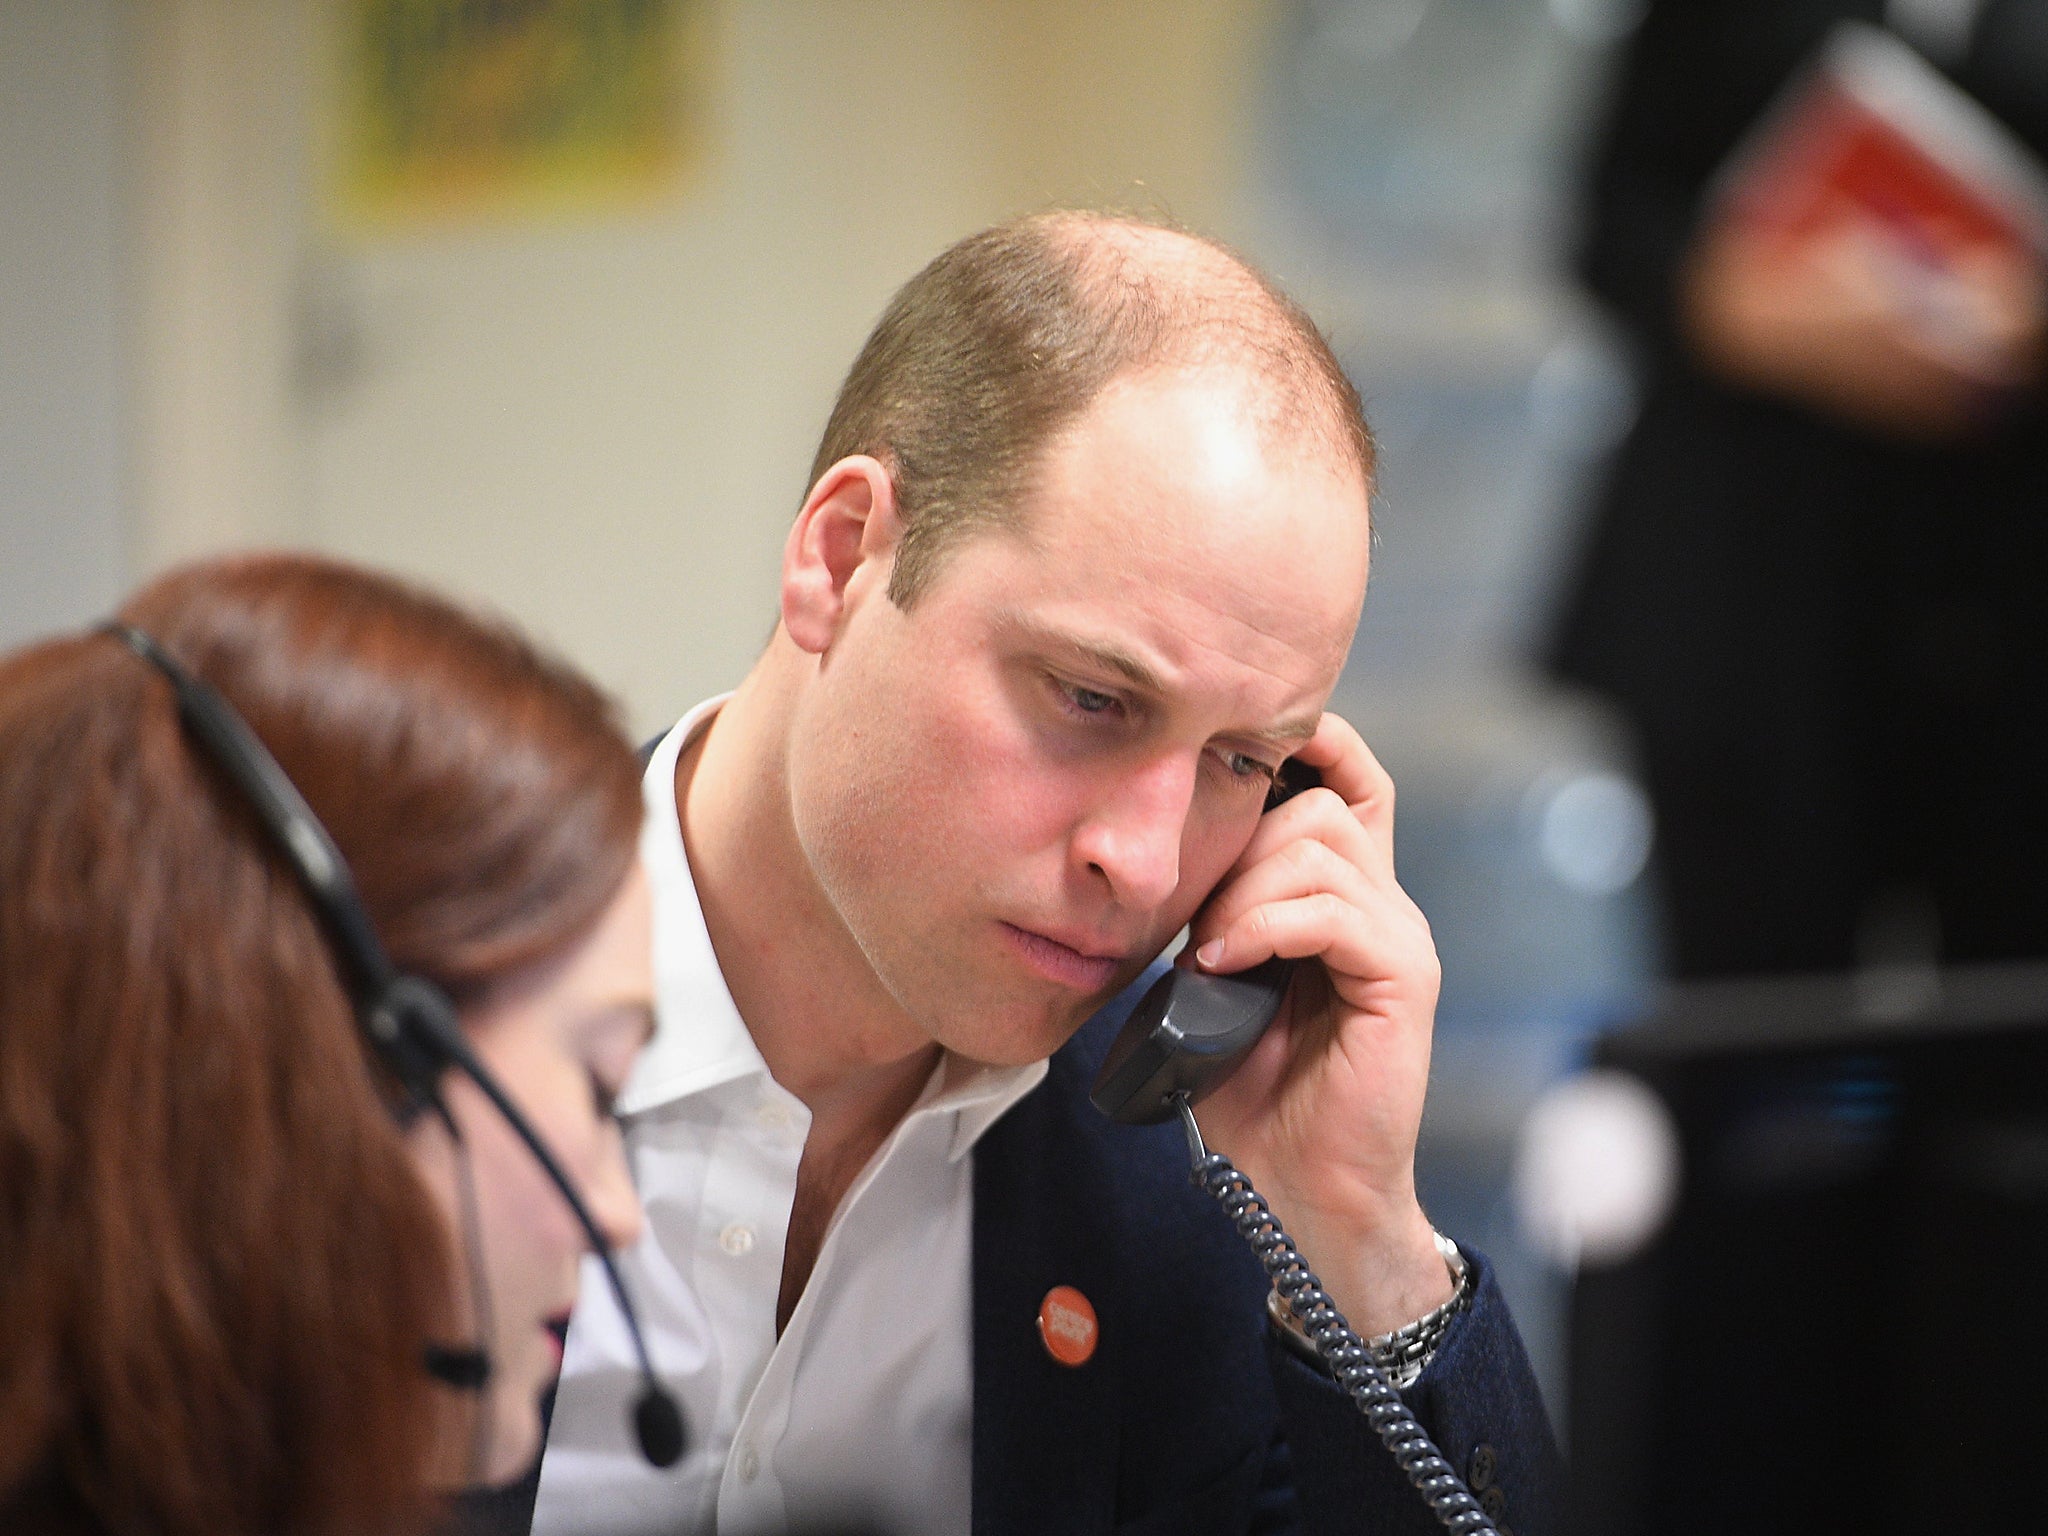 The Prince listens as adviser Carys Lewis takes the helpline’s first call